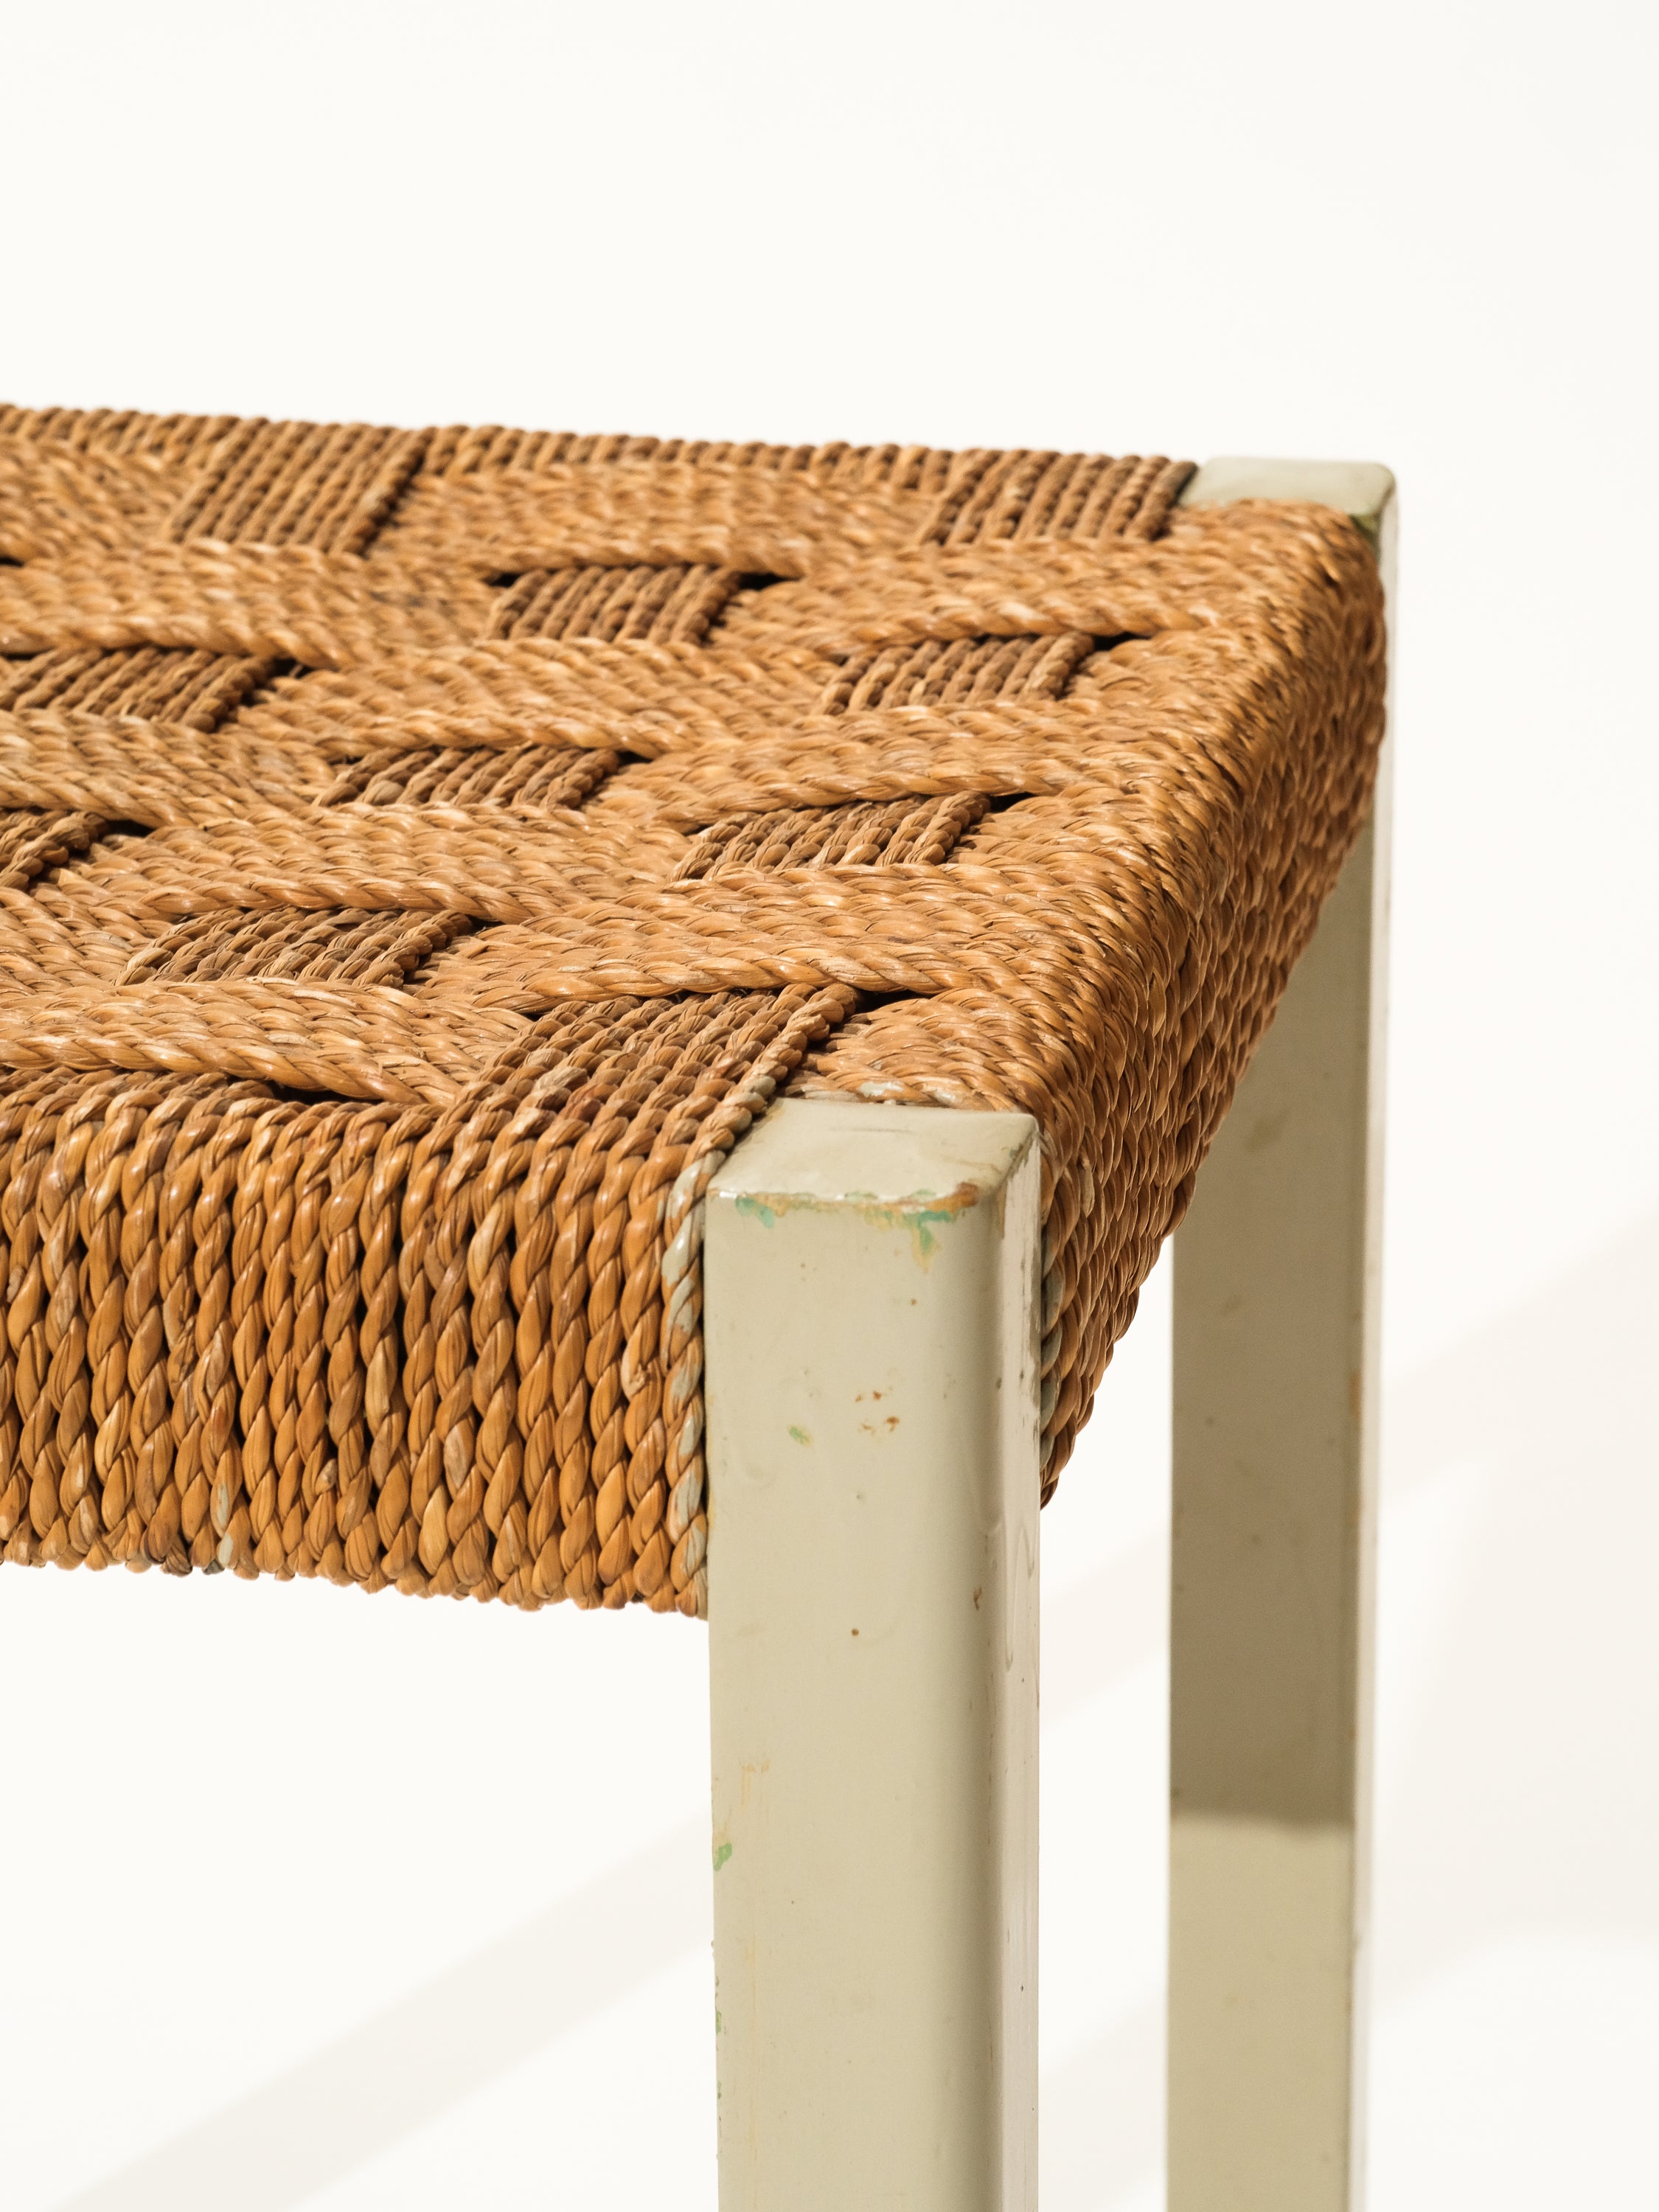 Woven Seagrass and Painted Wood Stool by Axel Larsson for Gemla, Sweden, 1940s